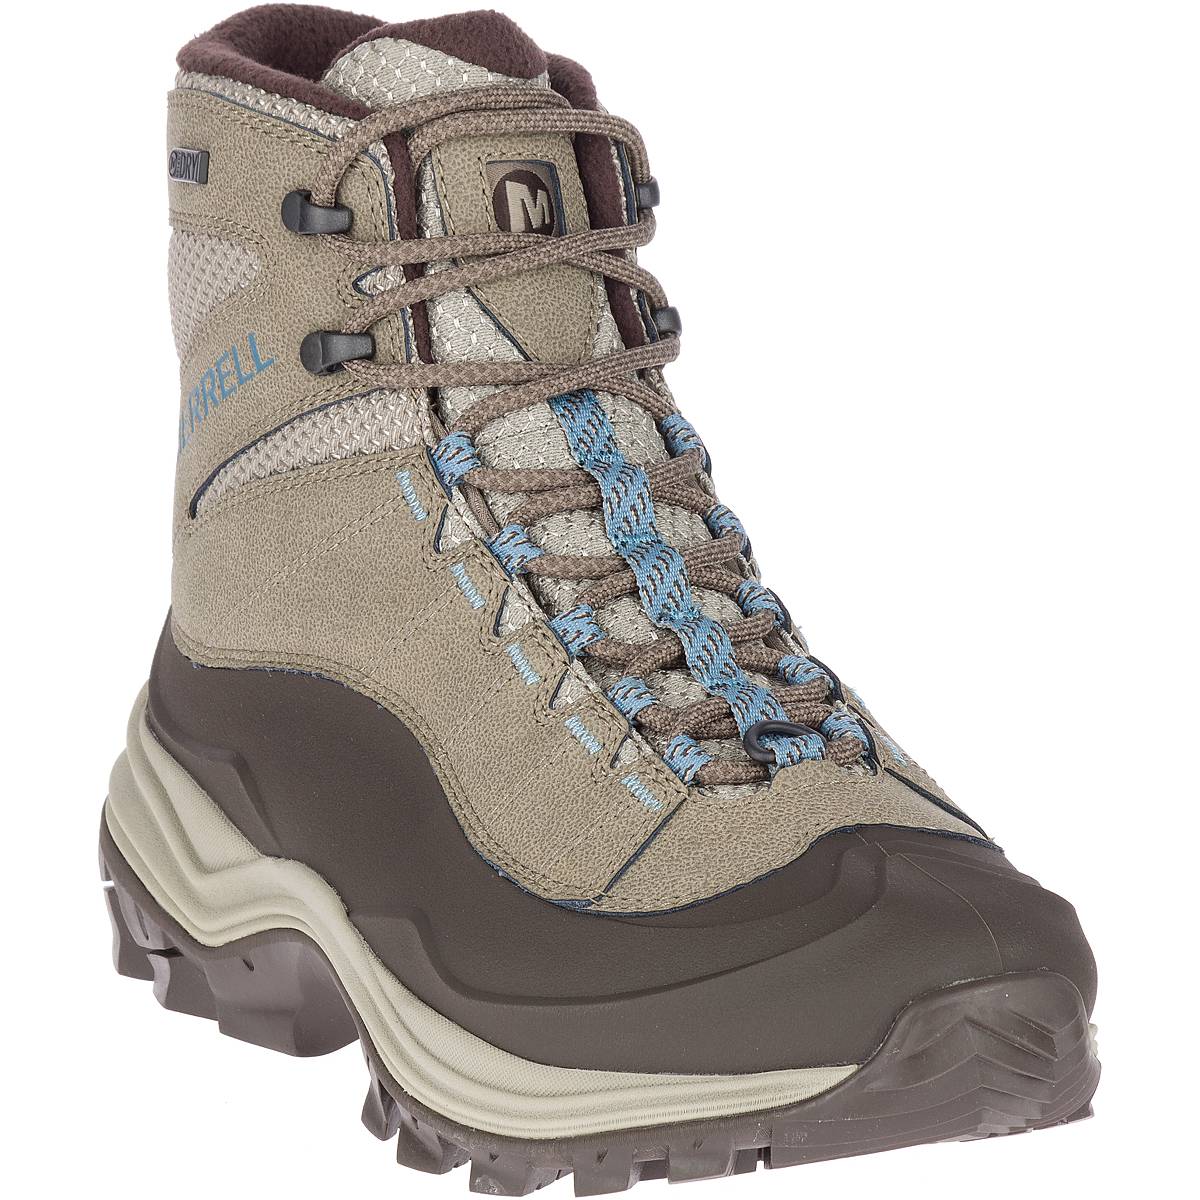 Merrell Thermo Chill Mid Shell Waterproof - Dámske Zimné Topánky - Hnede (SK-16821)